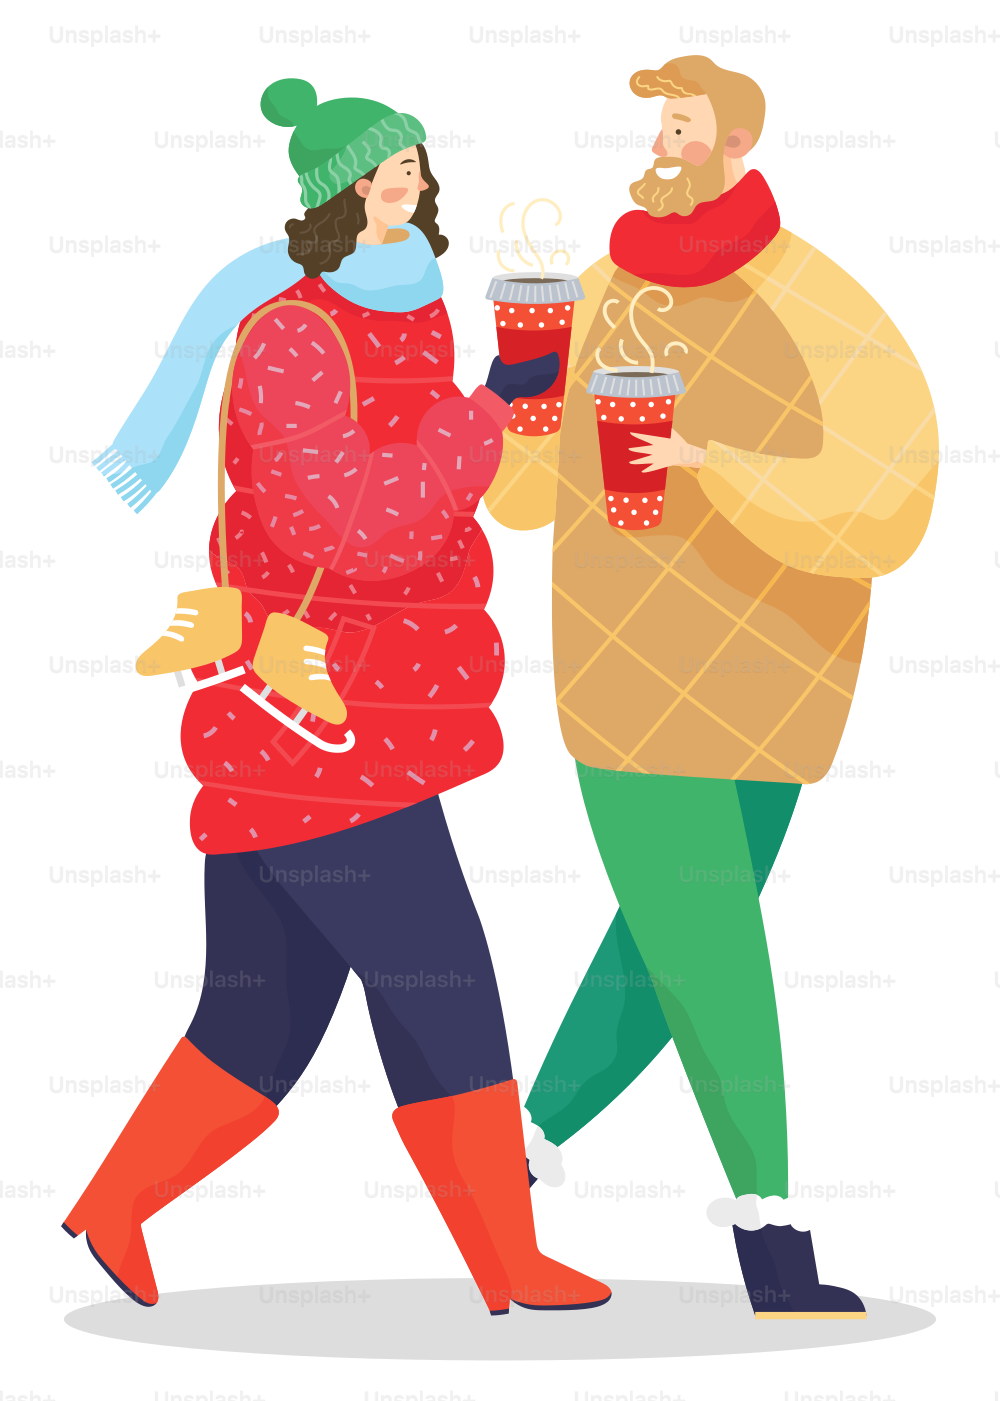 Couple walking together in winter urban park. People drinking coffee from cups outdoor in cold weather. Man and woman strolling in warm clothes and with skates. Vector illustration in flat style